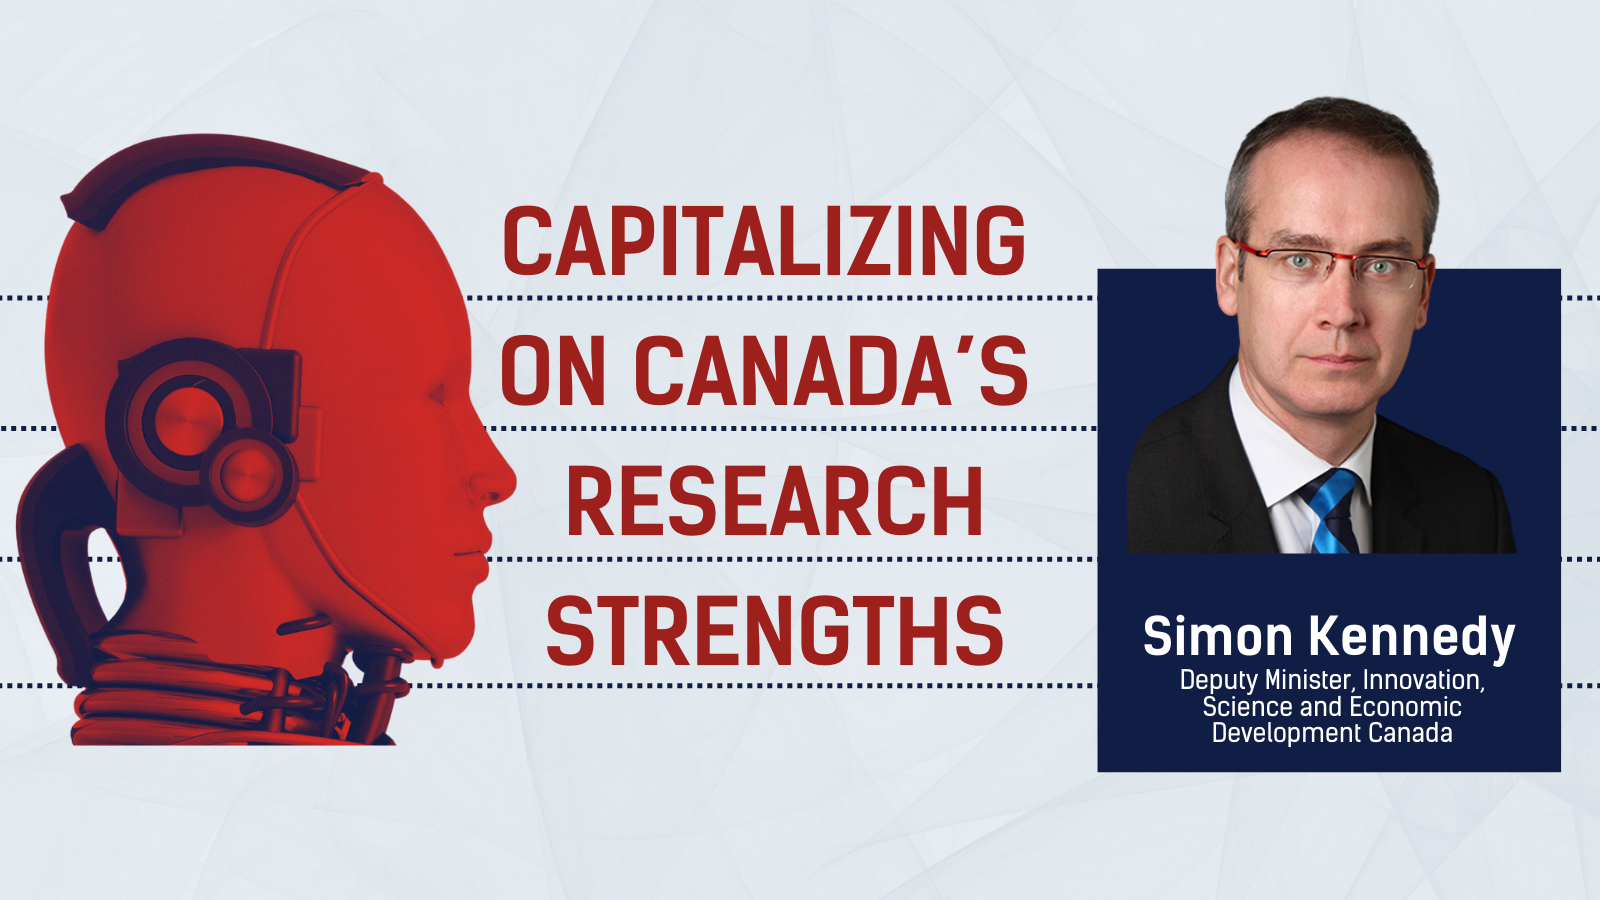 A banner with the title "Capitalizing on Canada's research strengths" alongside the headshot of a white man and a stylized android head